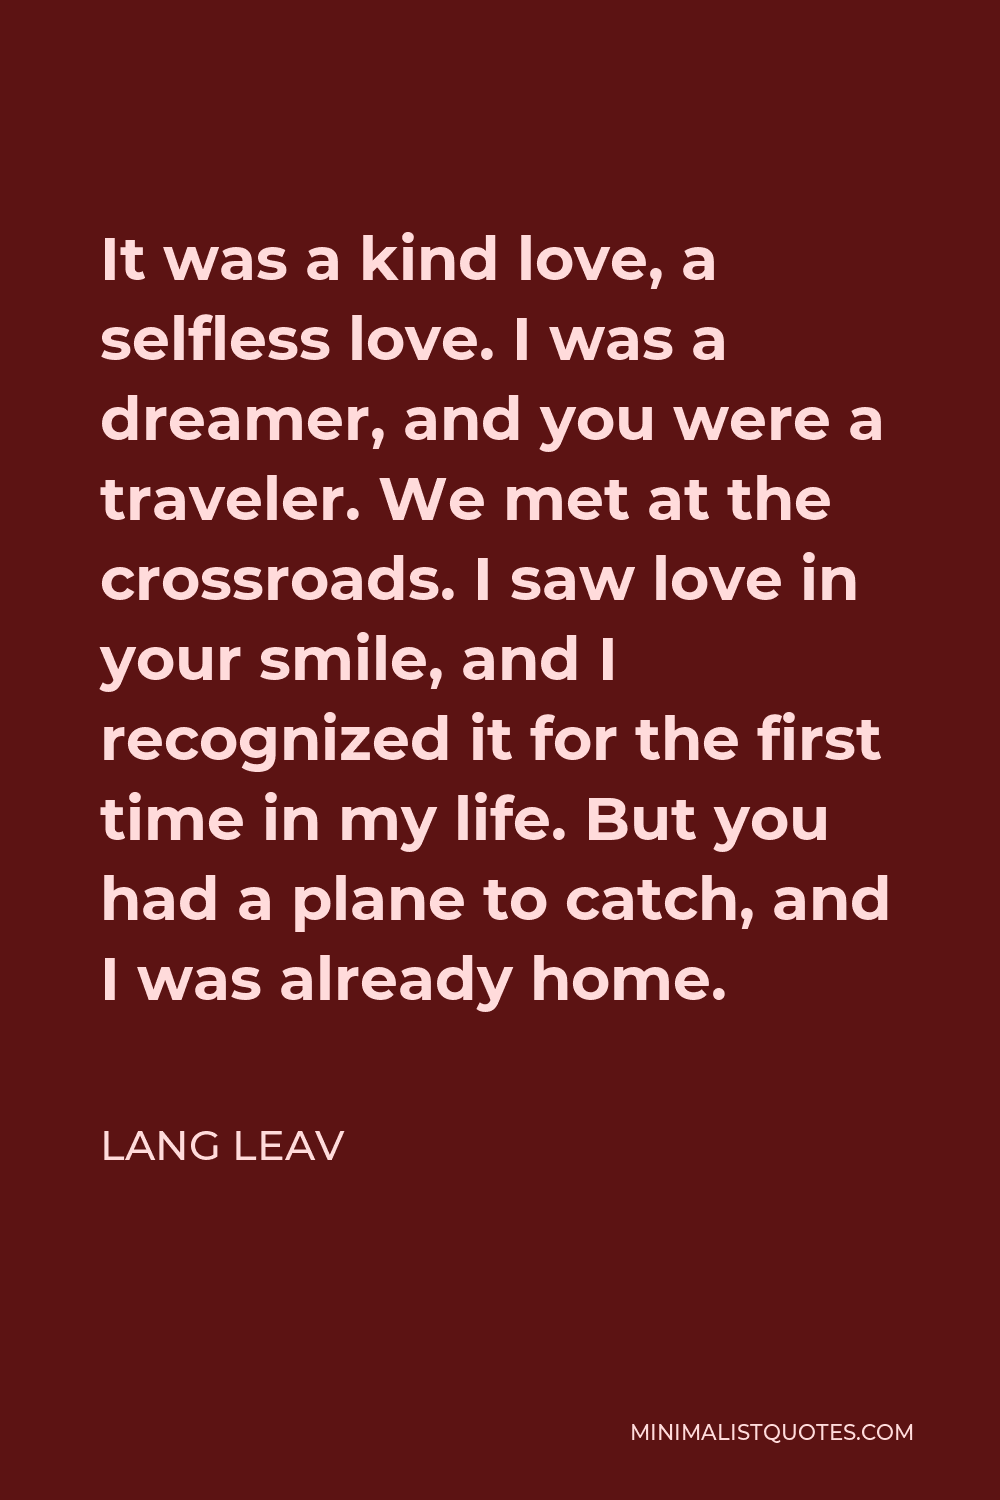 Lang Leav Quote - It was a kind love, a selfless love. I was a dreamer, and you were a traveler. We met at the crossroads. I saw love in your smile, and I recognized it for the first time in my life. But you had a plane to catch, and I was already home.